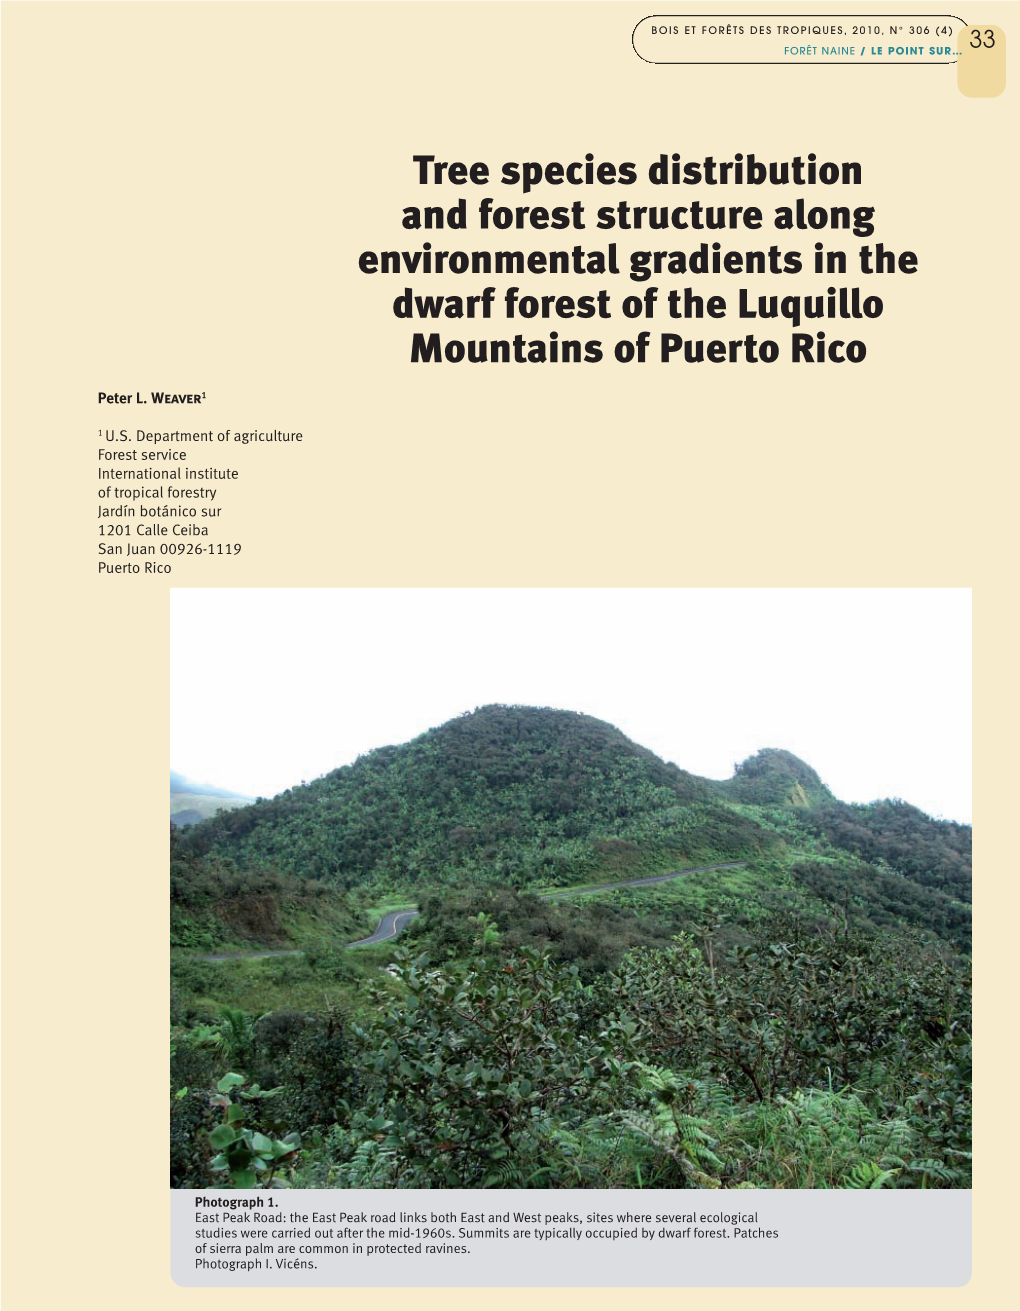 Tree Species Distribution and Forest Structure Along Environmental Gradients in the Dwarf Forest of the Luquillo Mountains of Puerto Rico